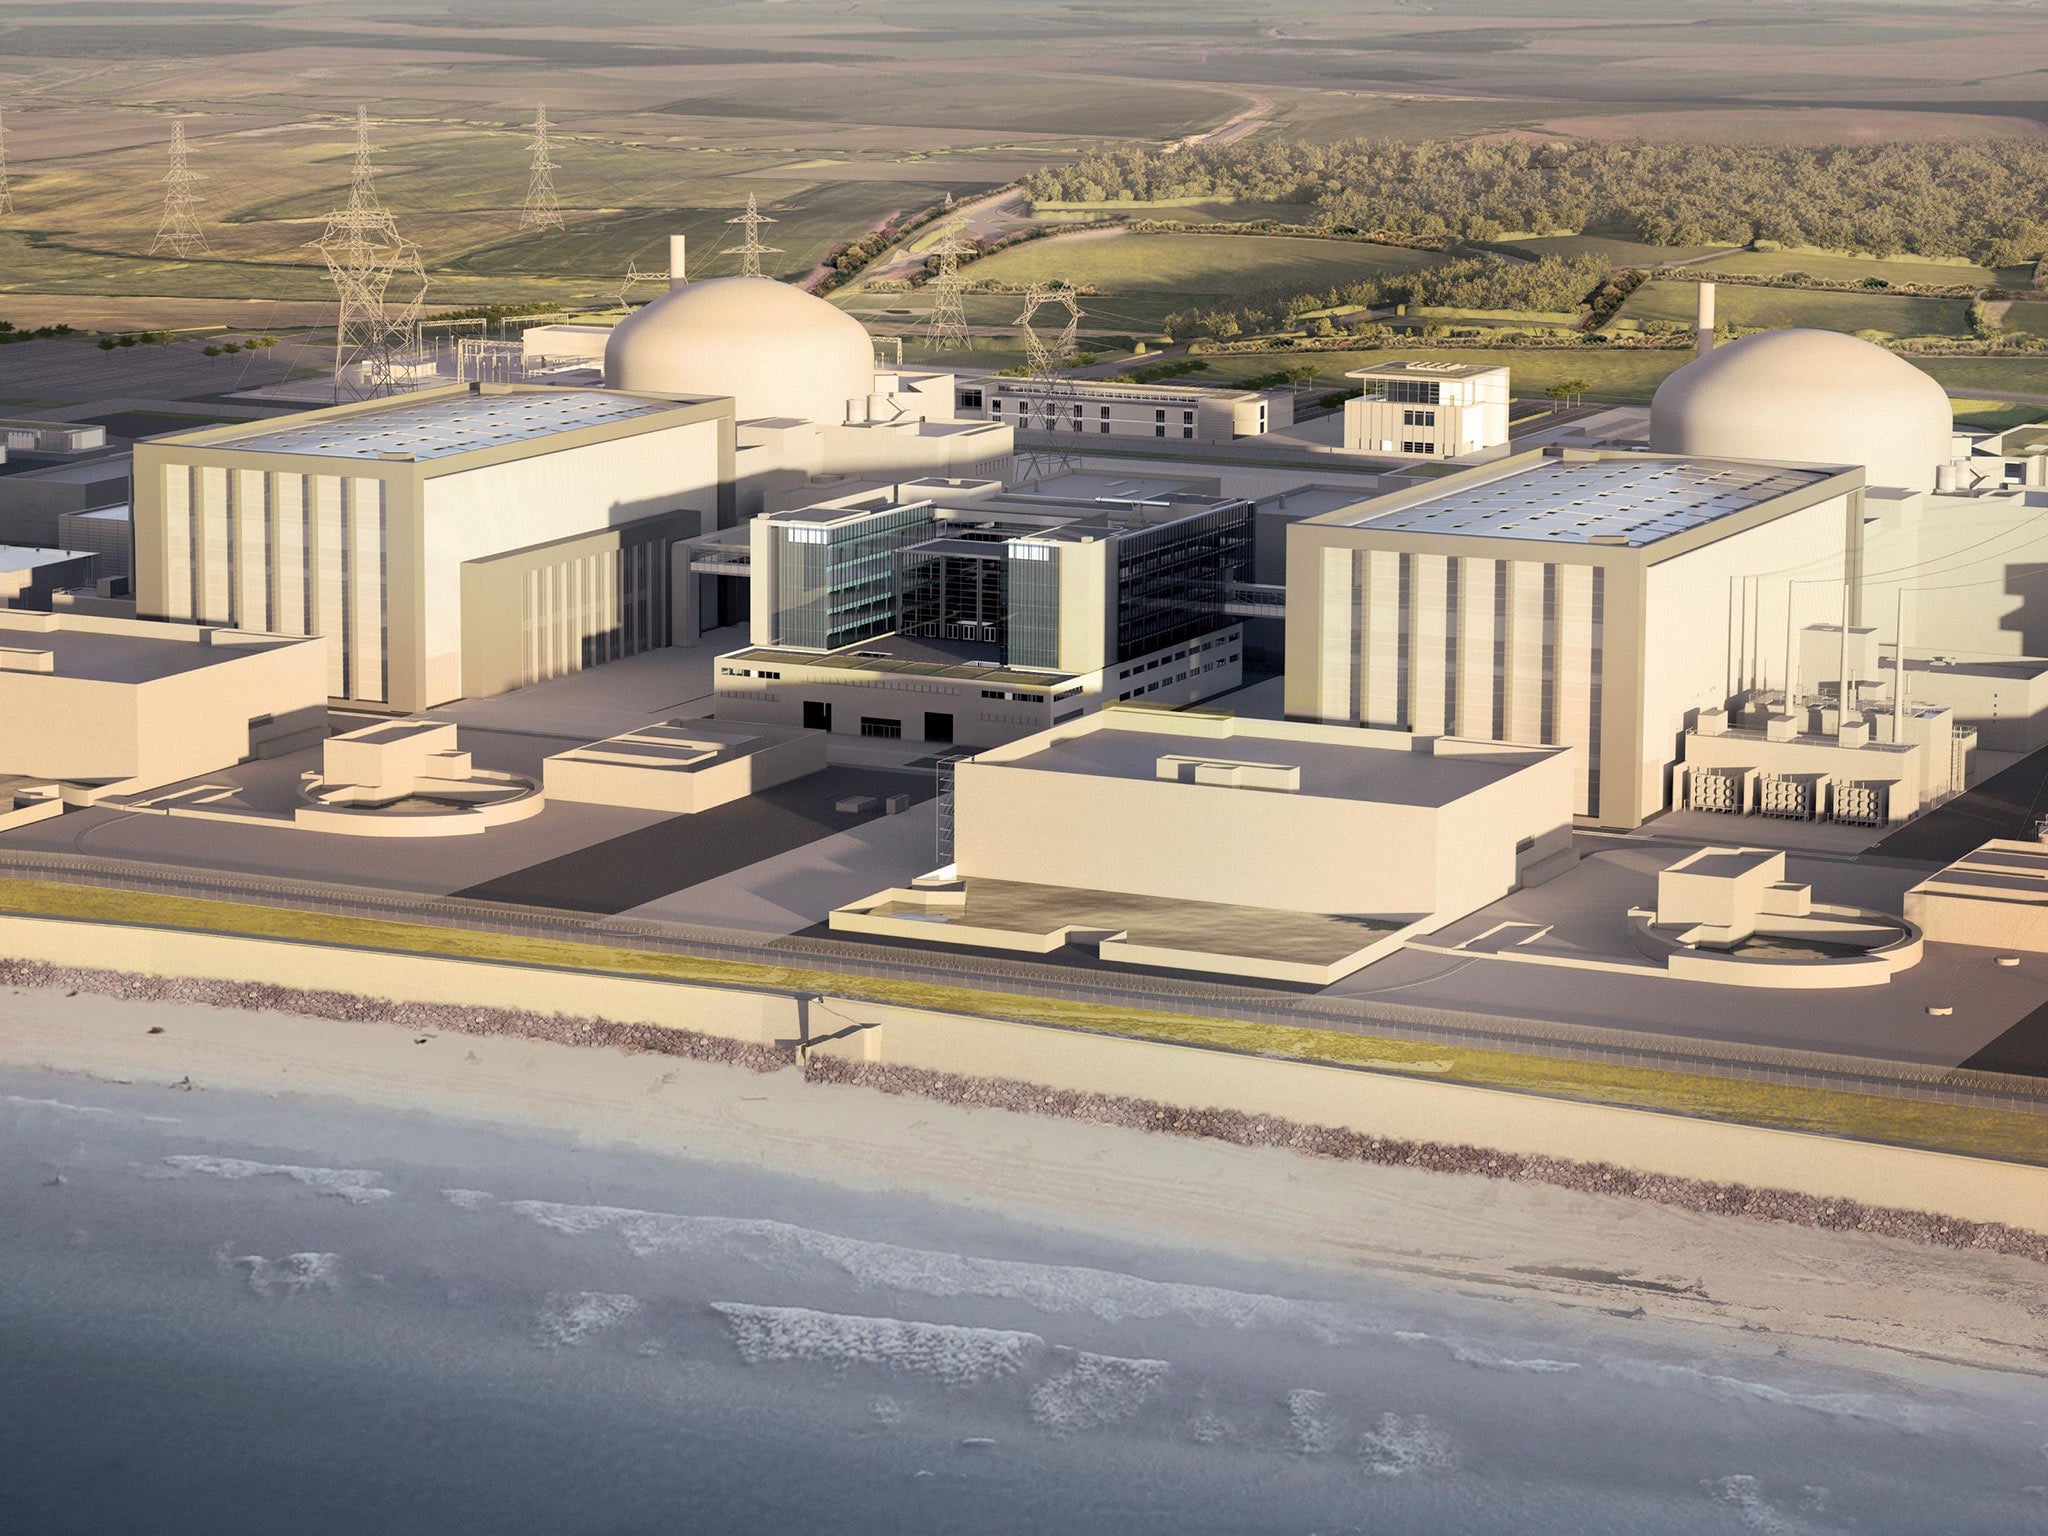 EDF has warned that the cost of building two nuclear reactors at Hinkley could be nearly £3 billion more than planned